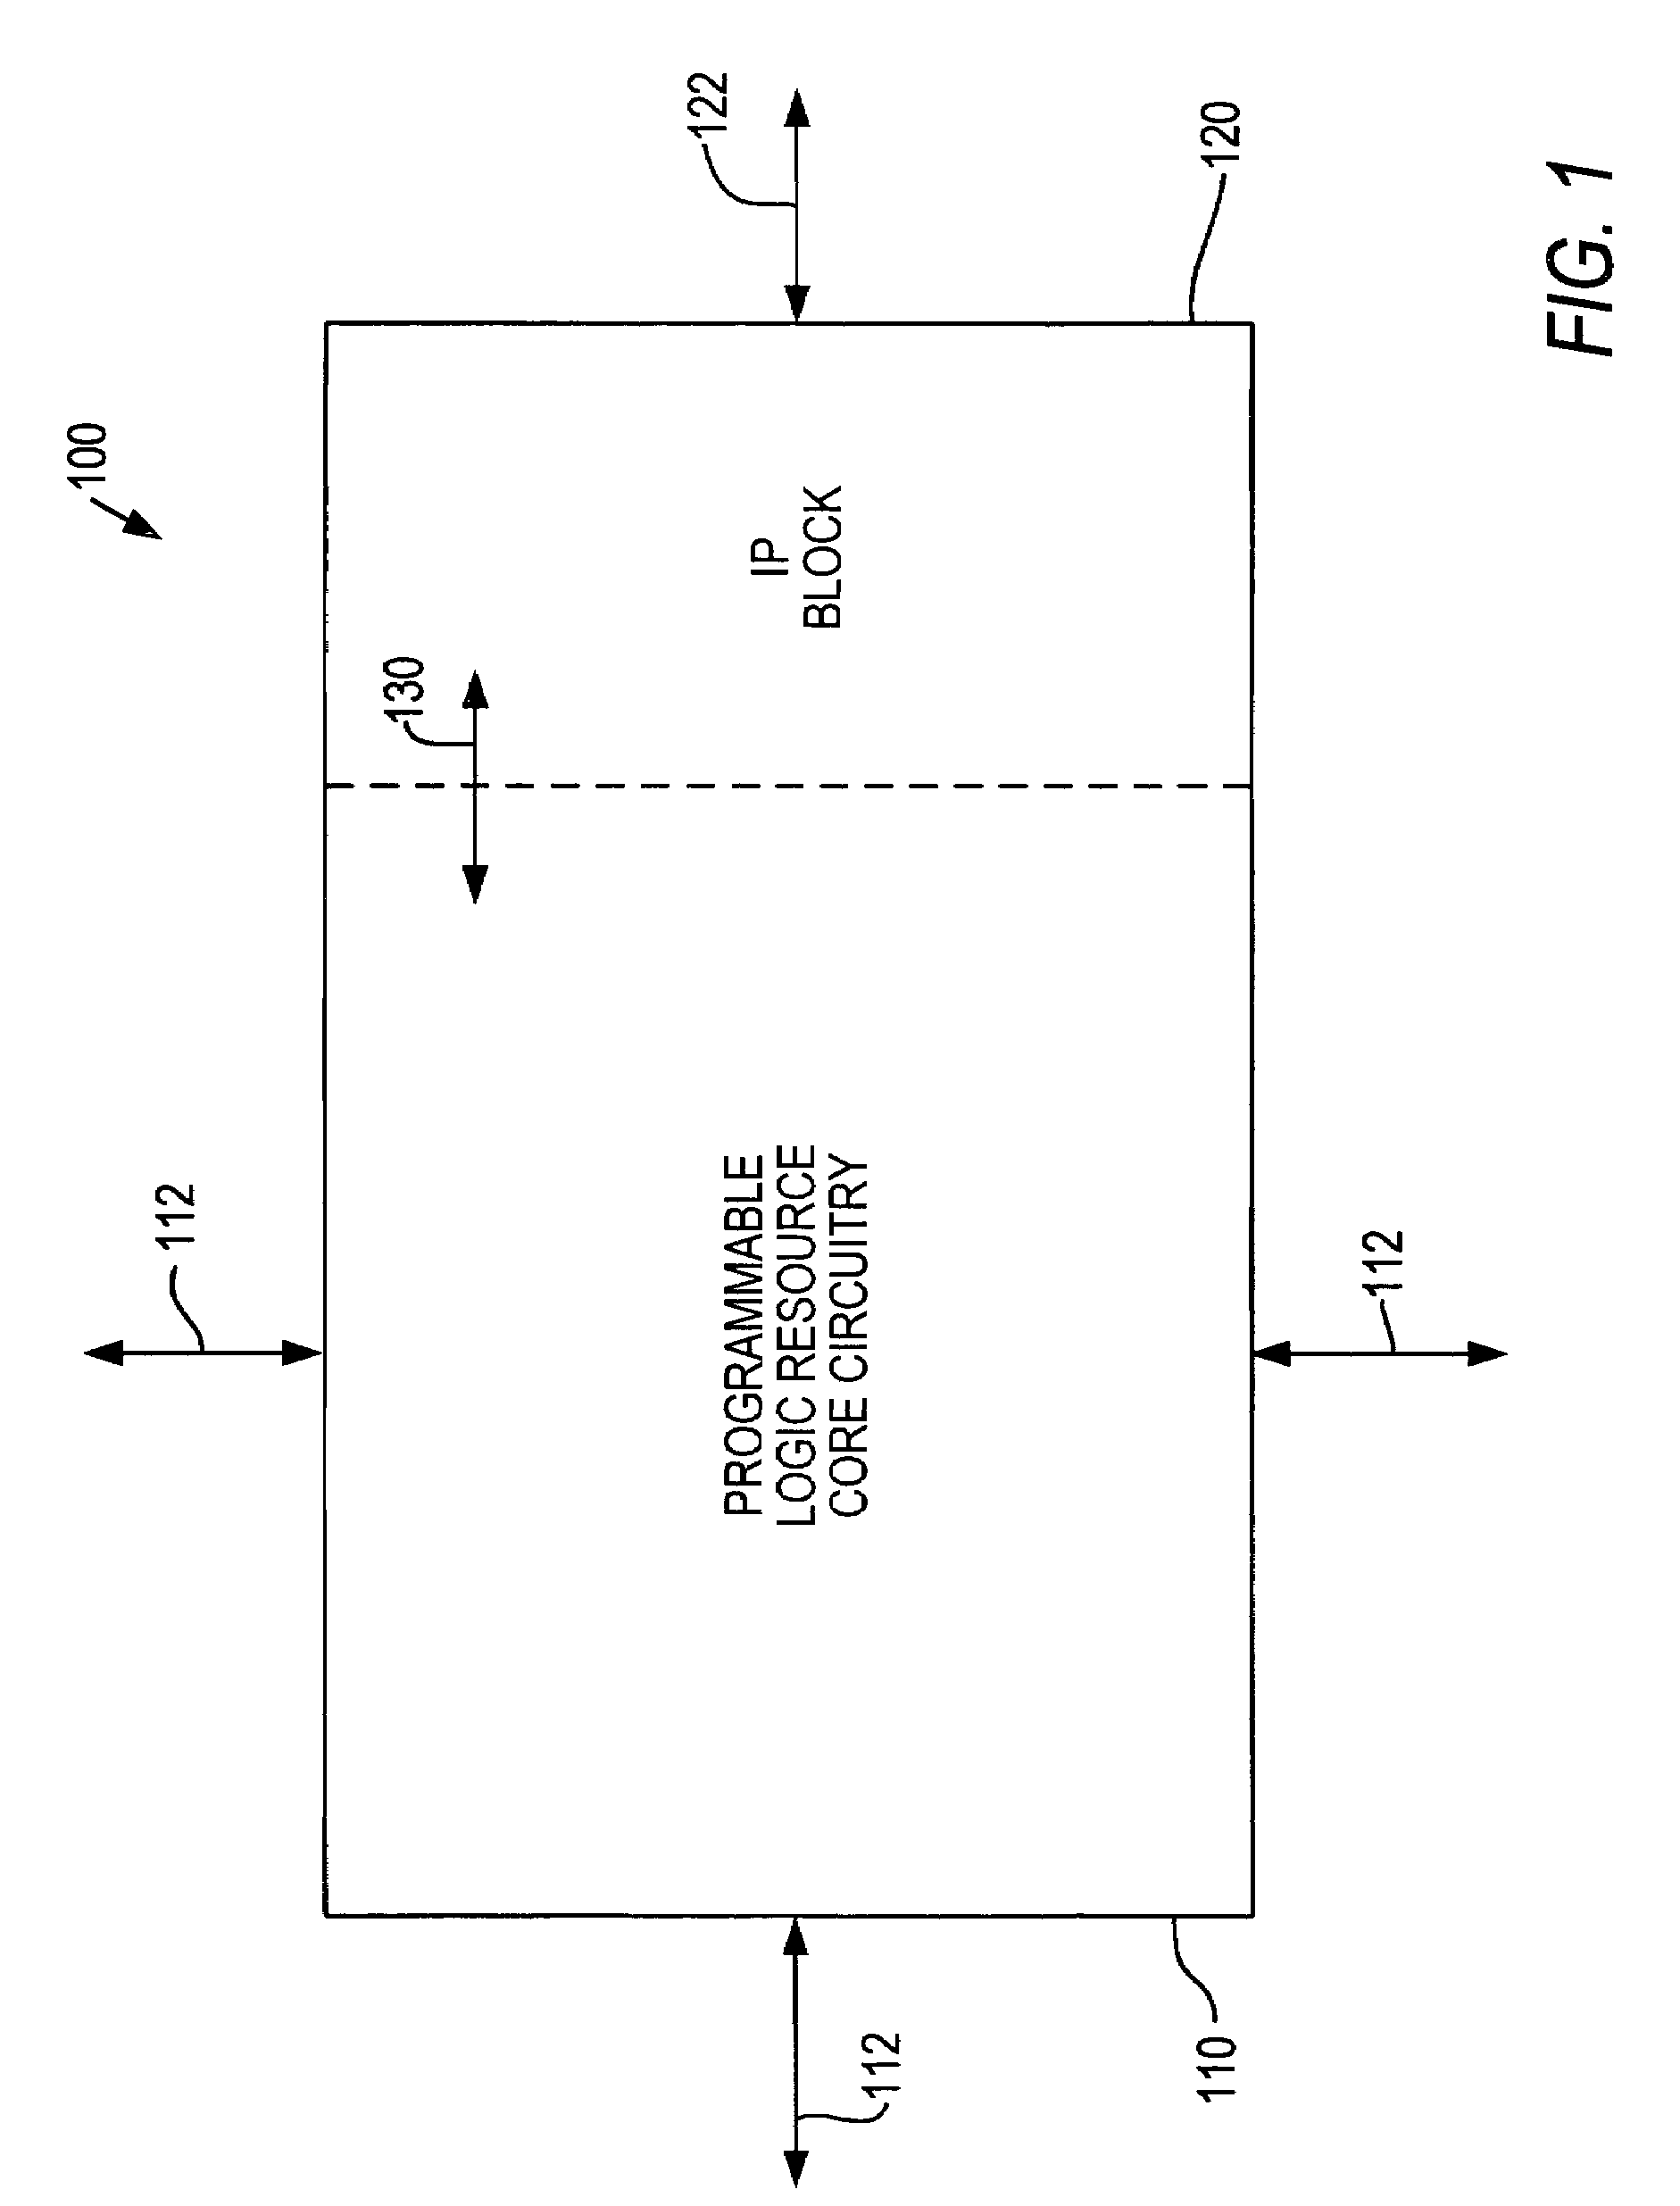 Dynamic phase alignment and clock recovery circuitry